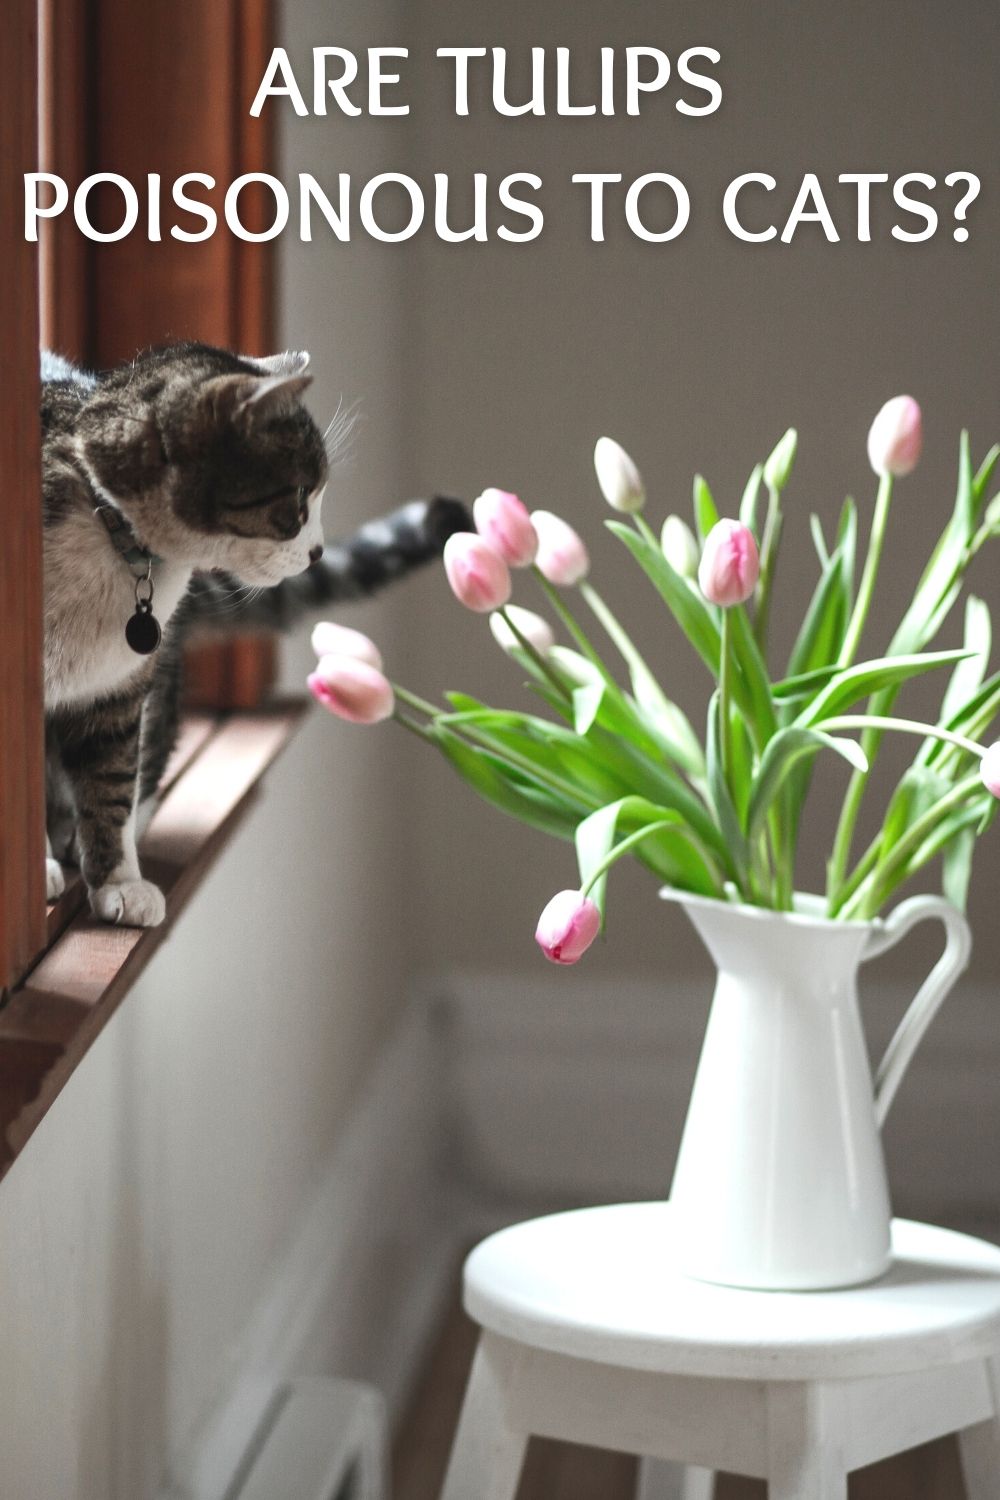 are tulips poisonous to cats?